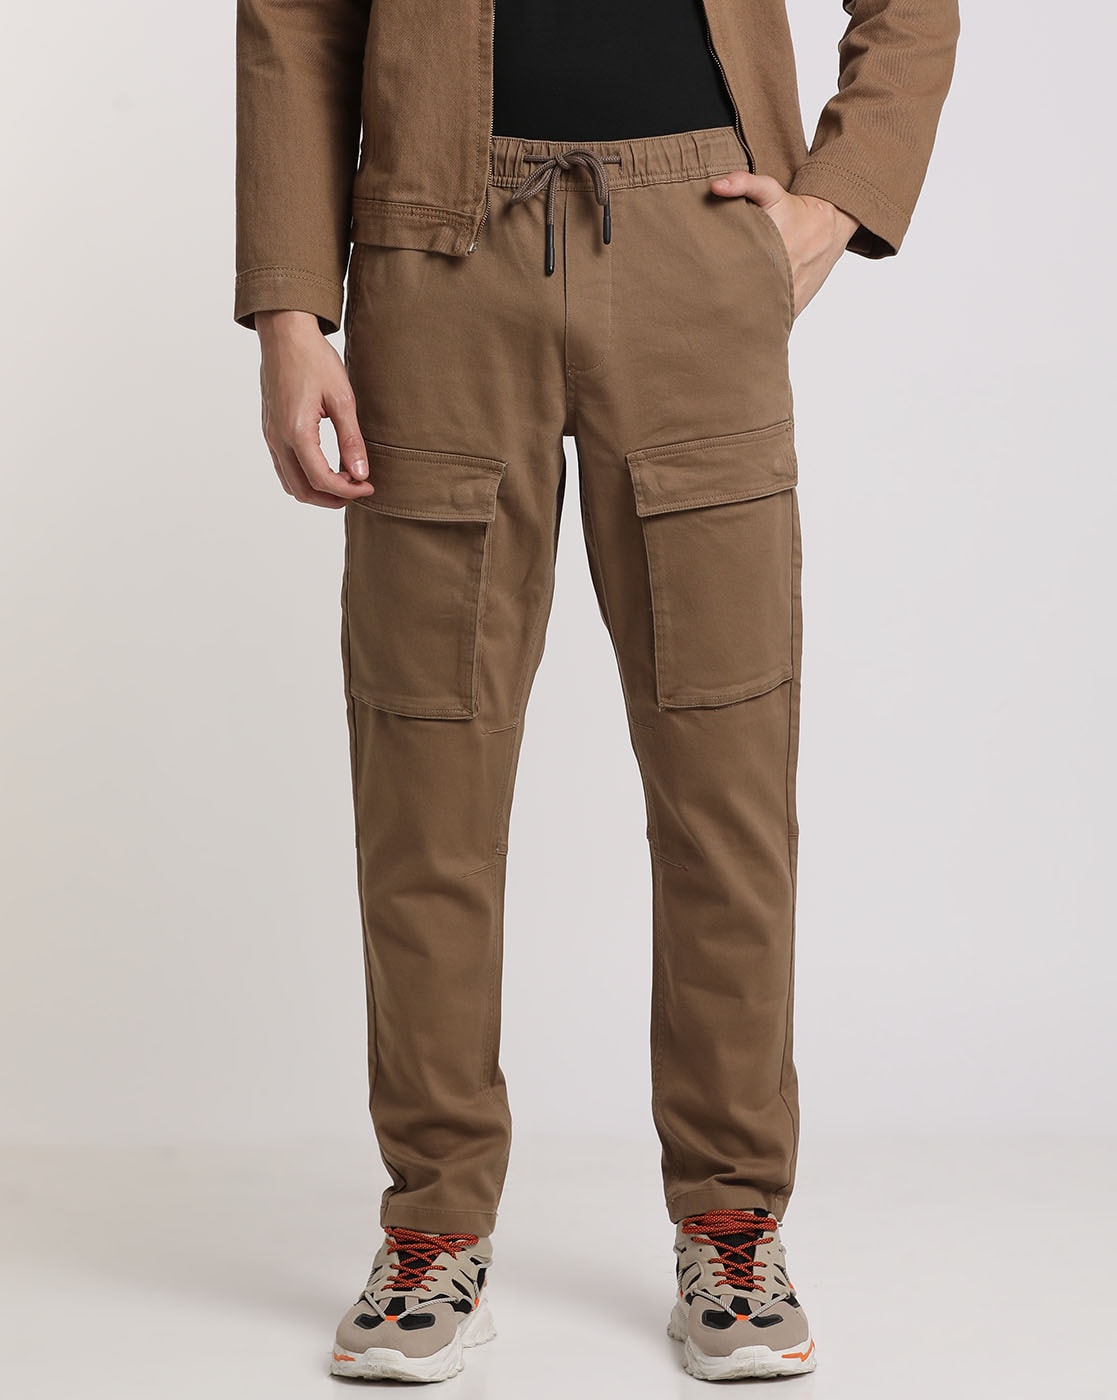 Buy Khaki Trousers & Pants for Men by ALTHEORY Online